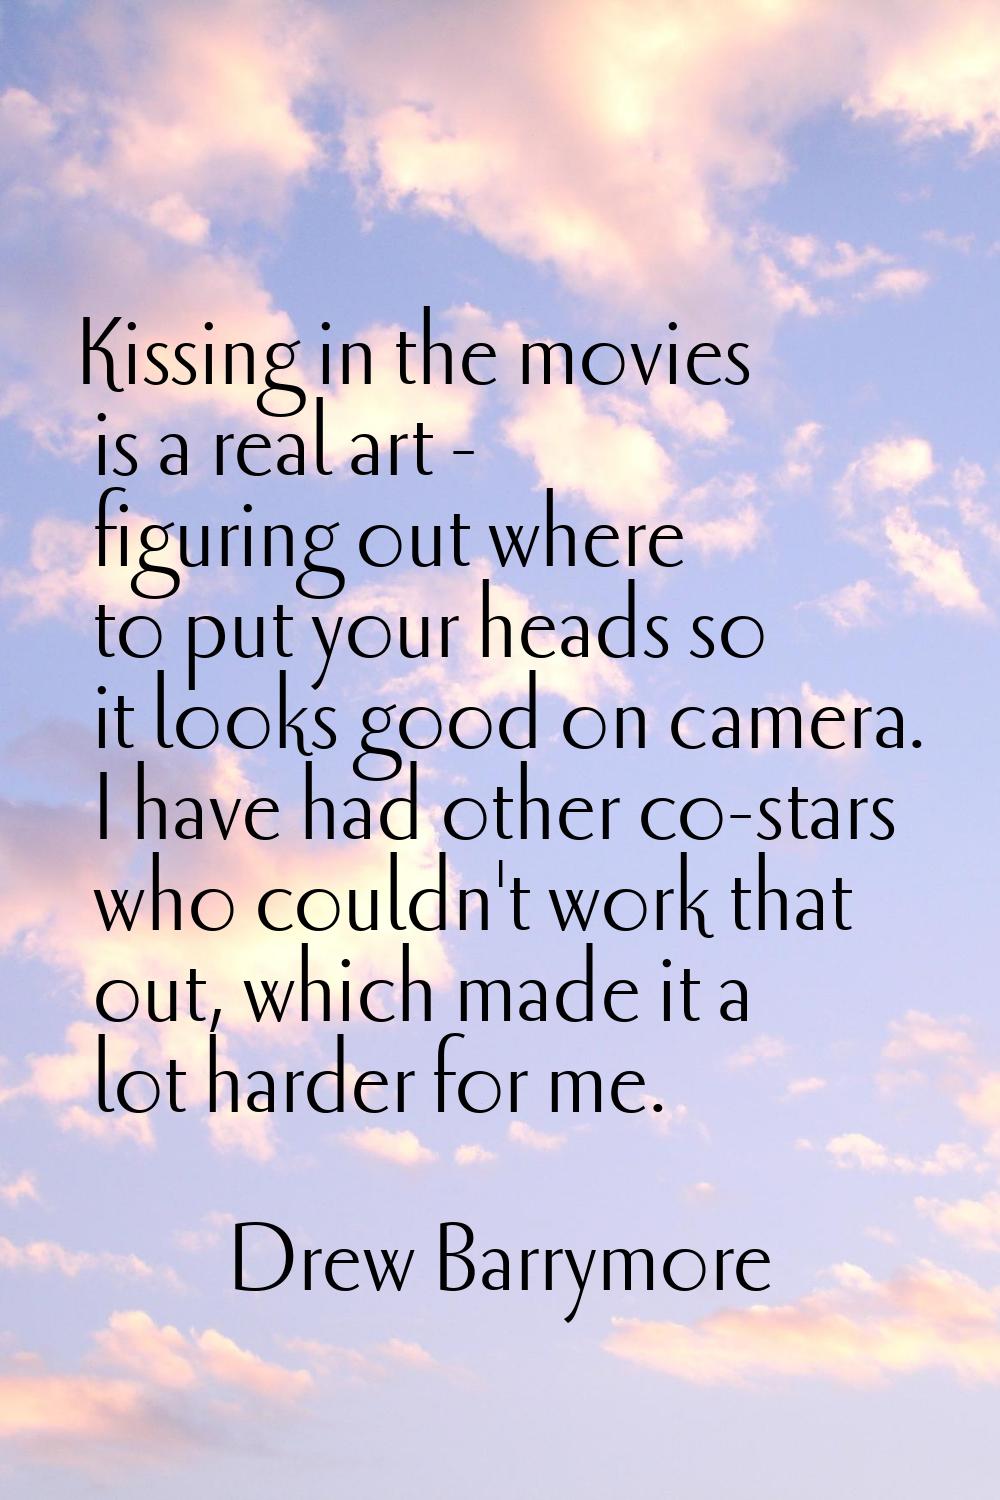 Kissing in the movies is a real art - figuring out where to put your heads so it looks good on came